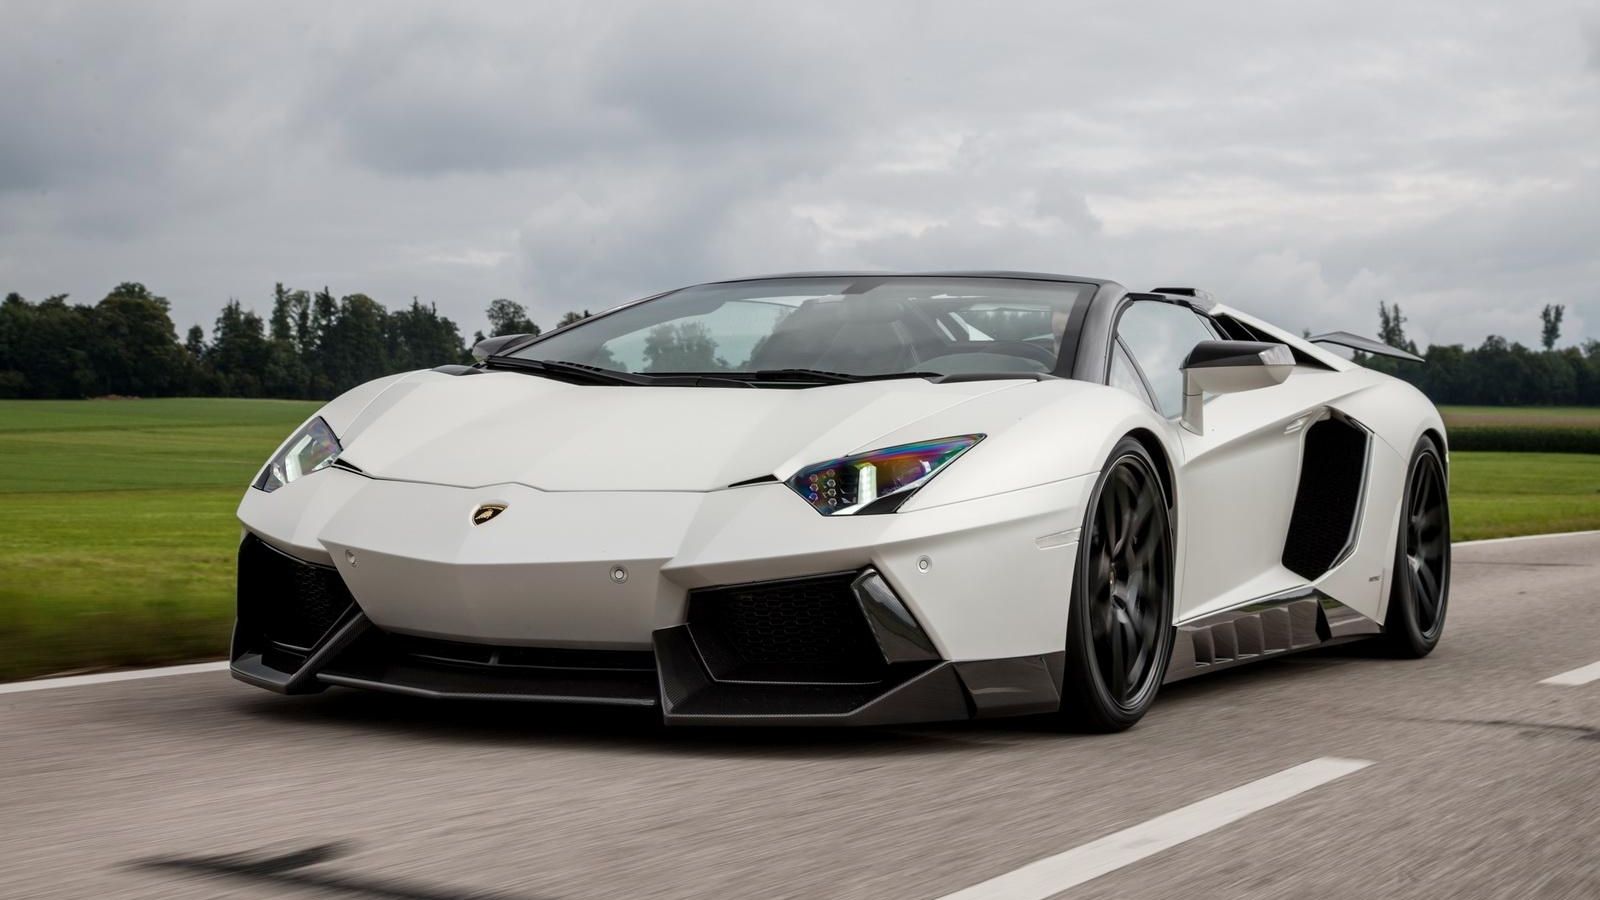  A light engine tune and tons of body work from Novitec Torado makes the Aventador Roadster look even meaner. 